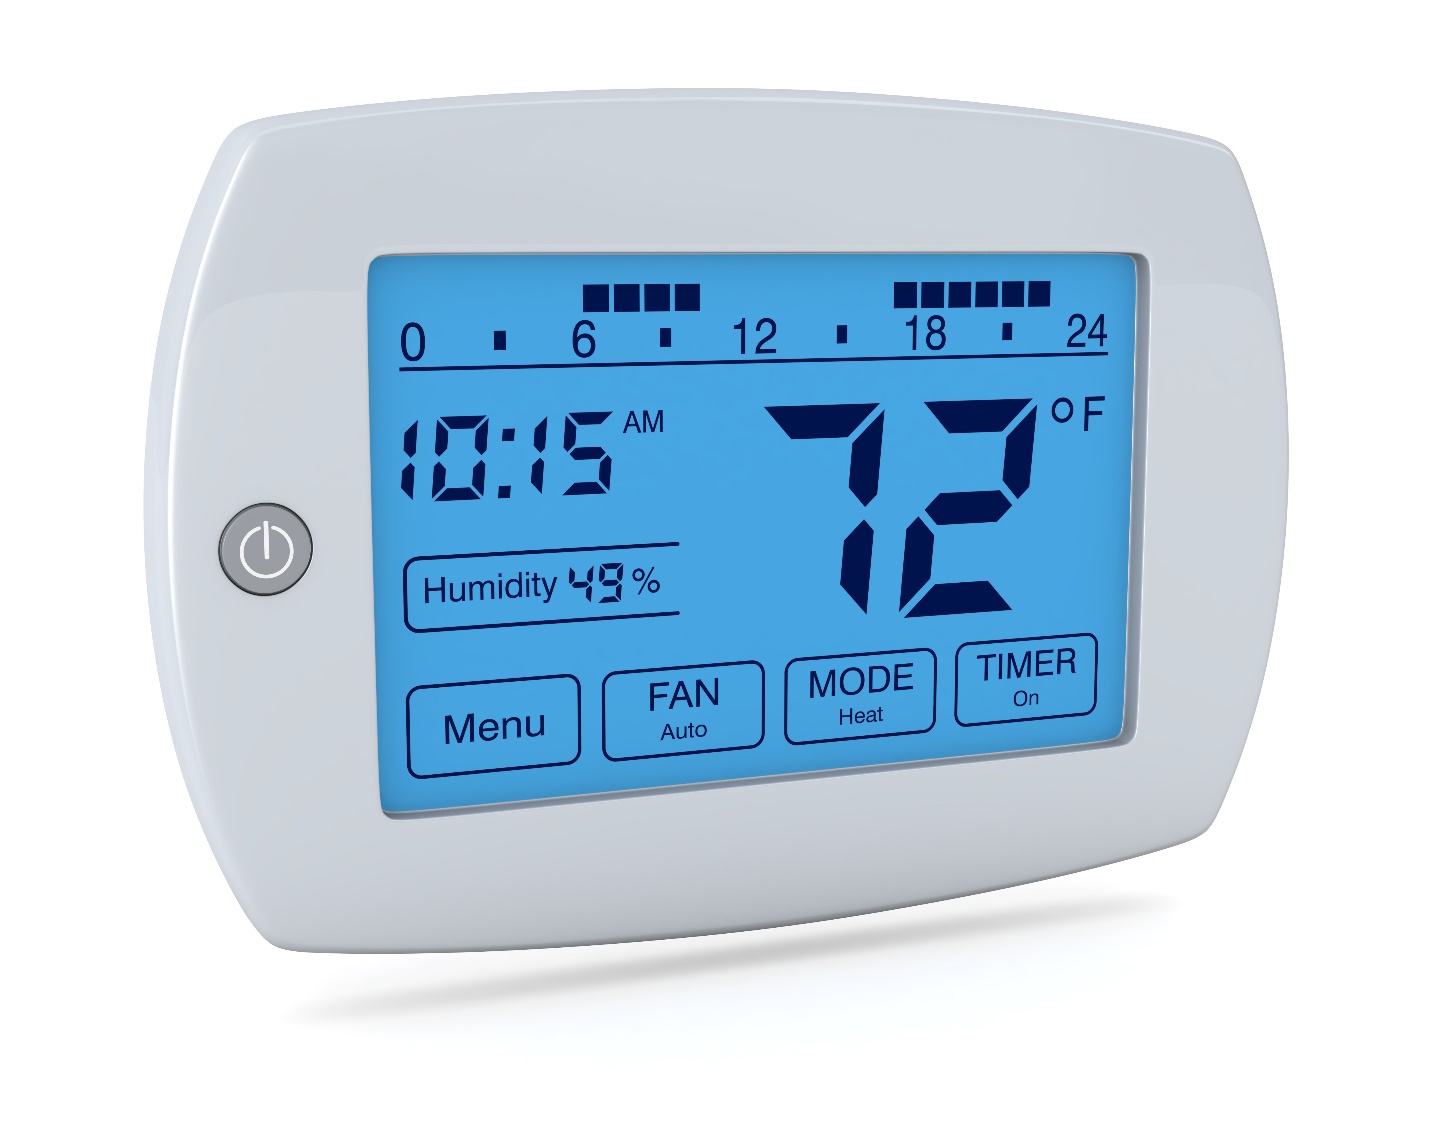 https://www.christiansonco.com/wp-content/uploads/2020/05/closeup-of-a-digital-programmable-thermostat.jpg